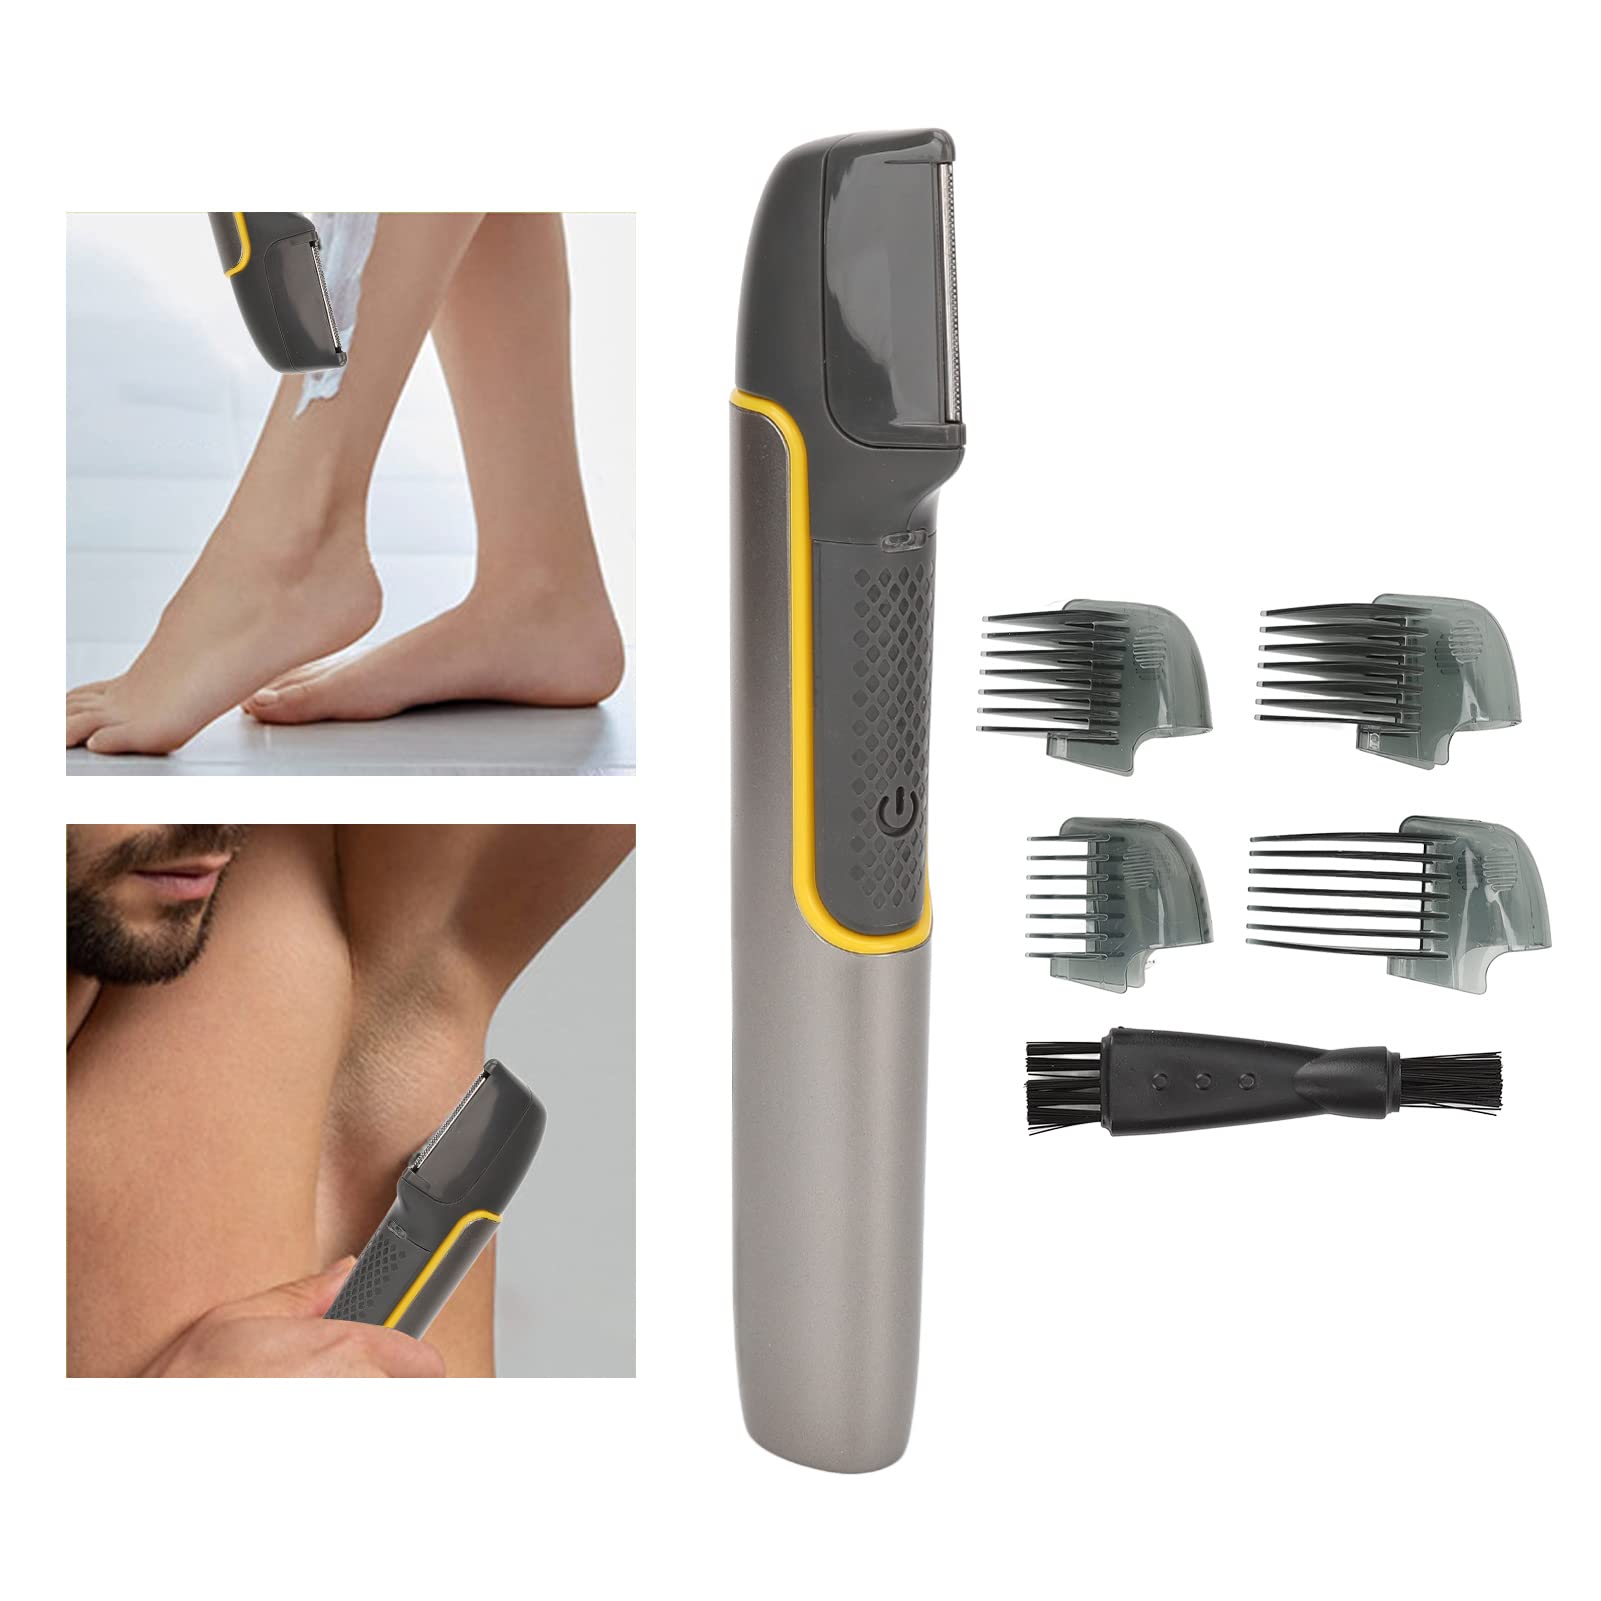 Hair Trimmer with LED Light, Waterproof Electric Shaver, Armpit H – BABACLICK